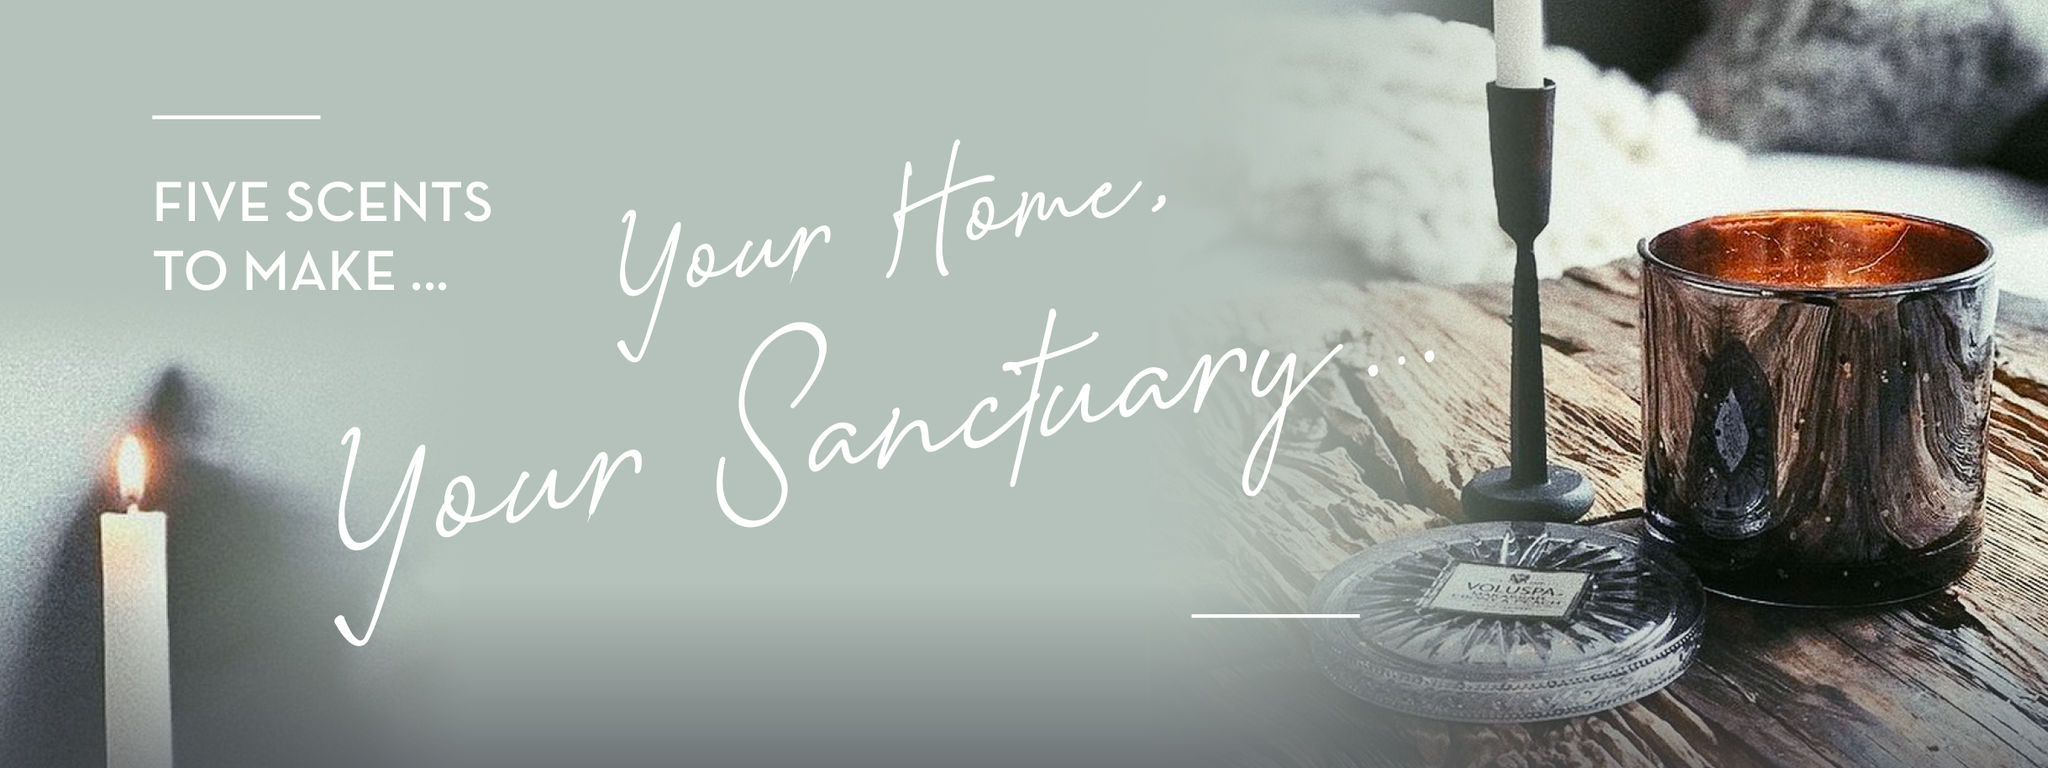 5 Scents to Make Your Home Your Sanctuary